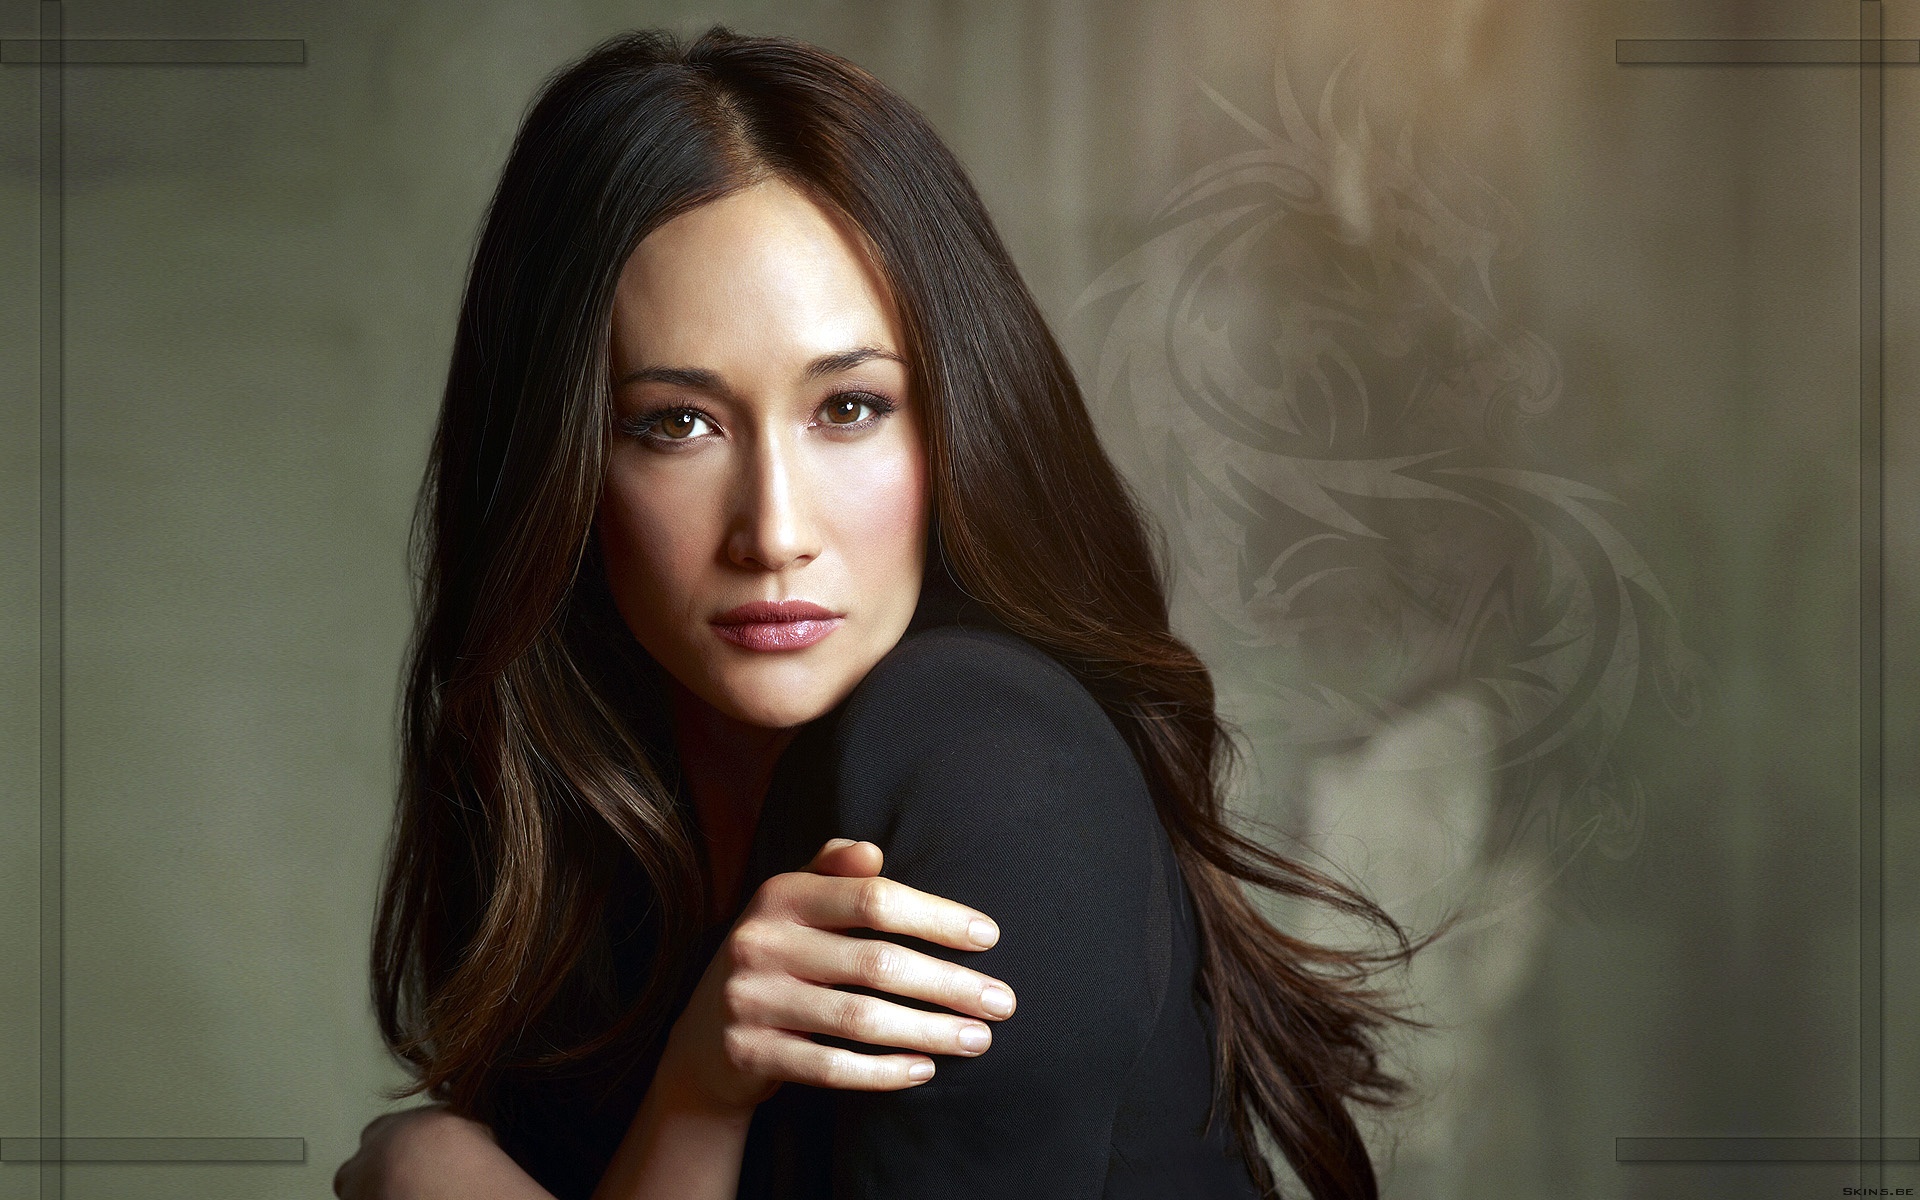 The newest CBS cop drama, hailing from Kevin Williamson, has just found its leading lady: Maggie Q.